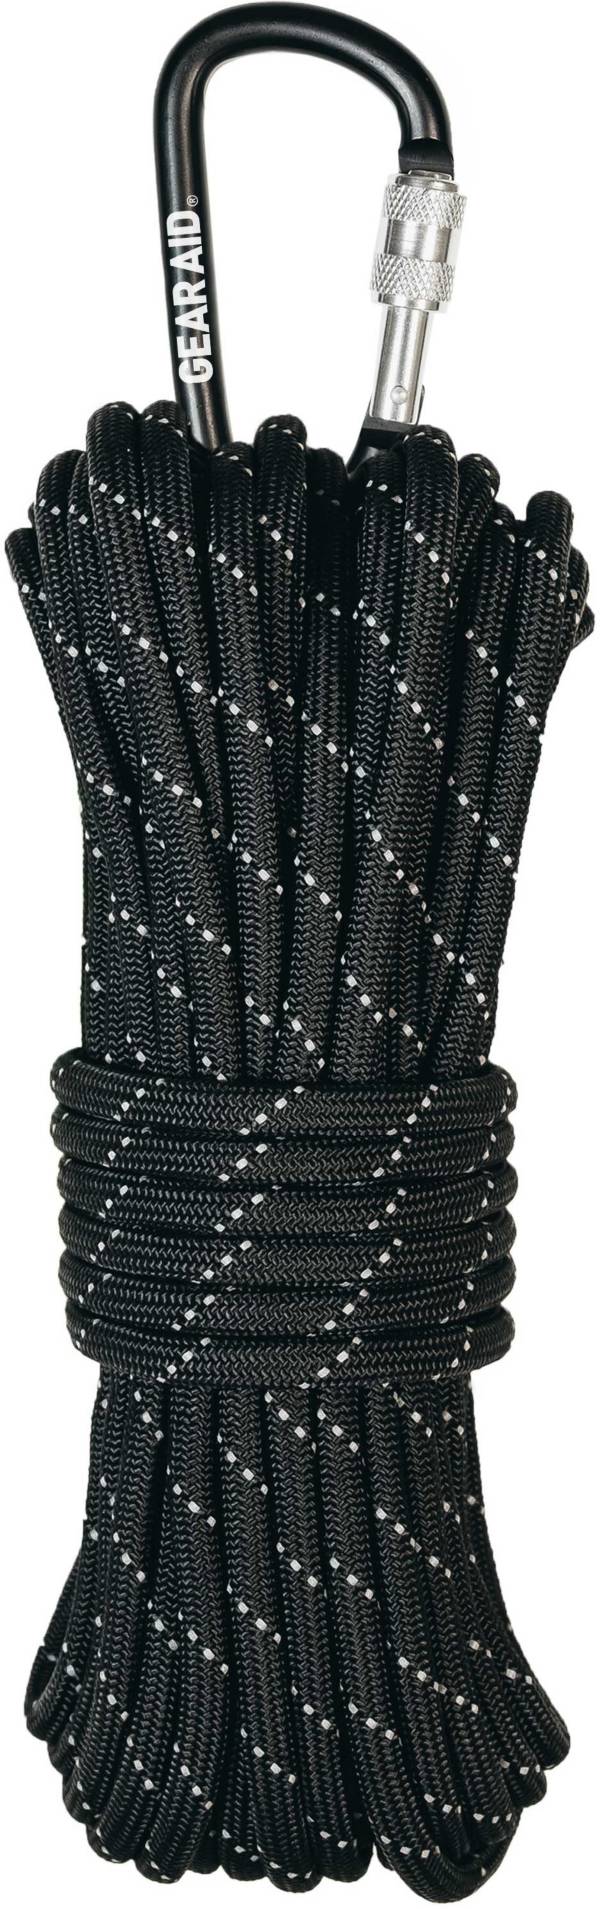 Gear Aid 50' 1100 Paracord product image